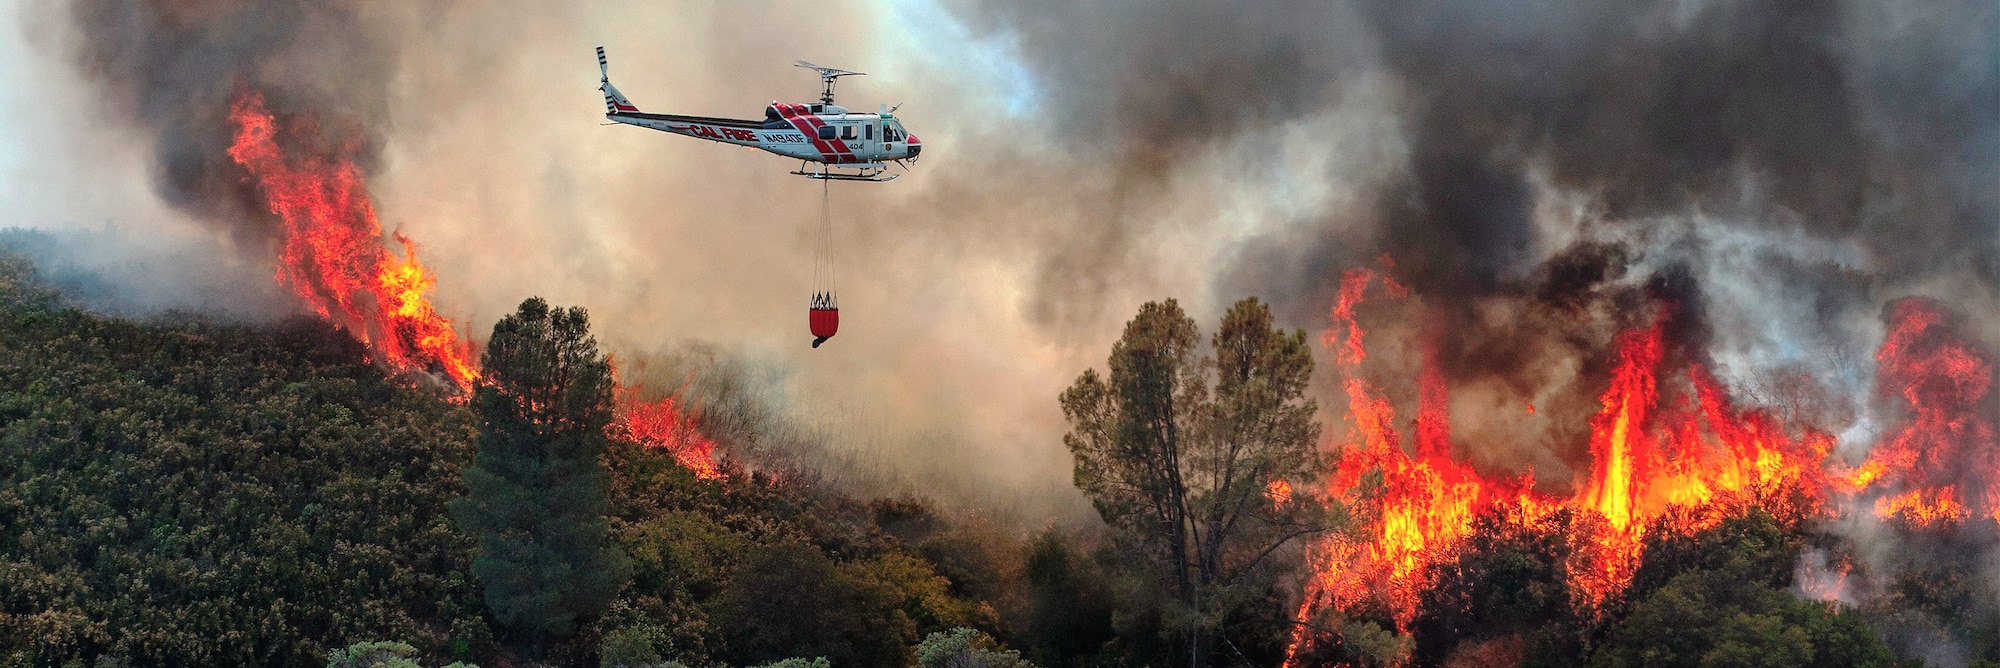 Helicopter flies over wildfire.